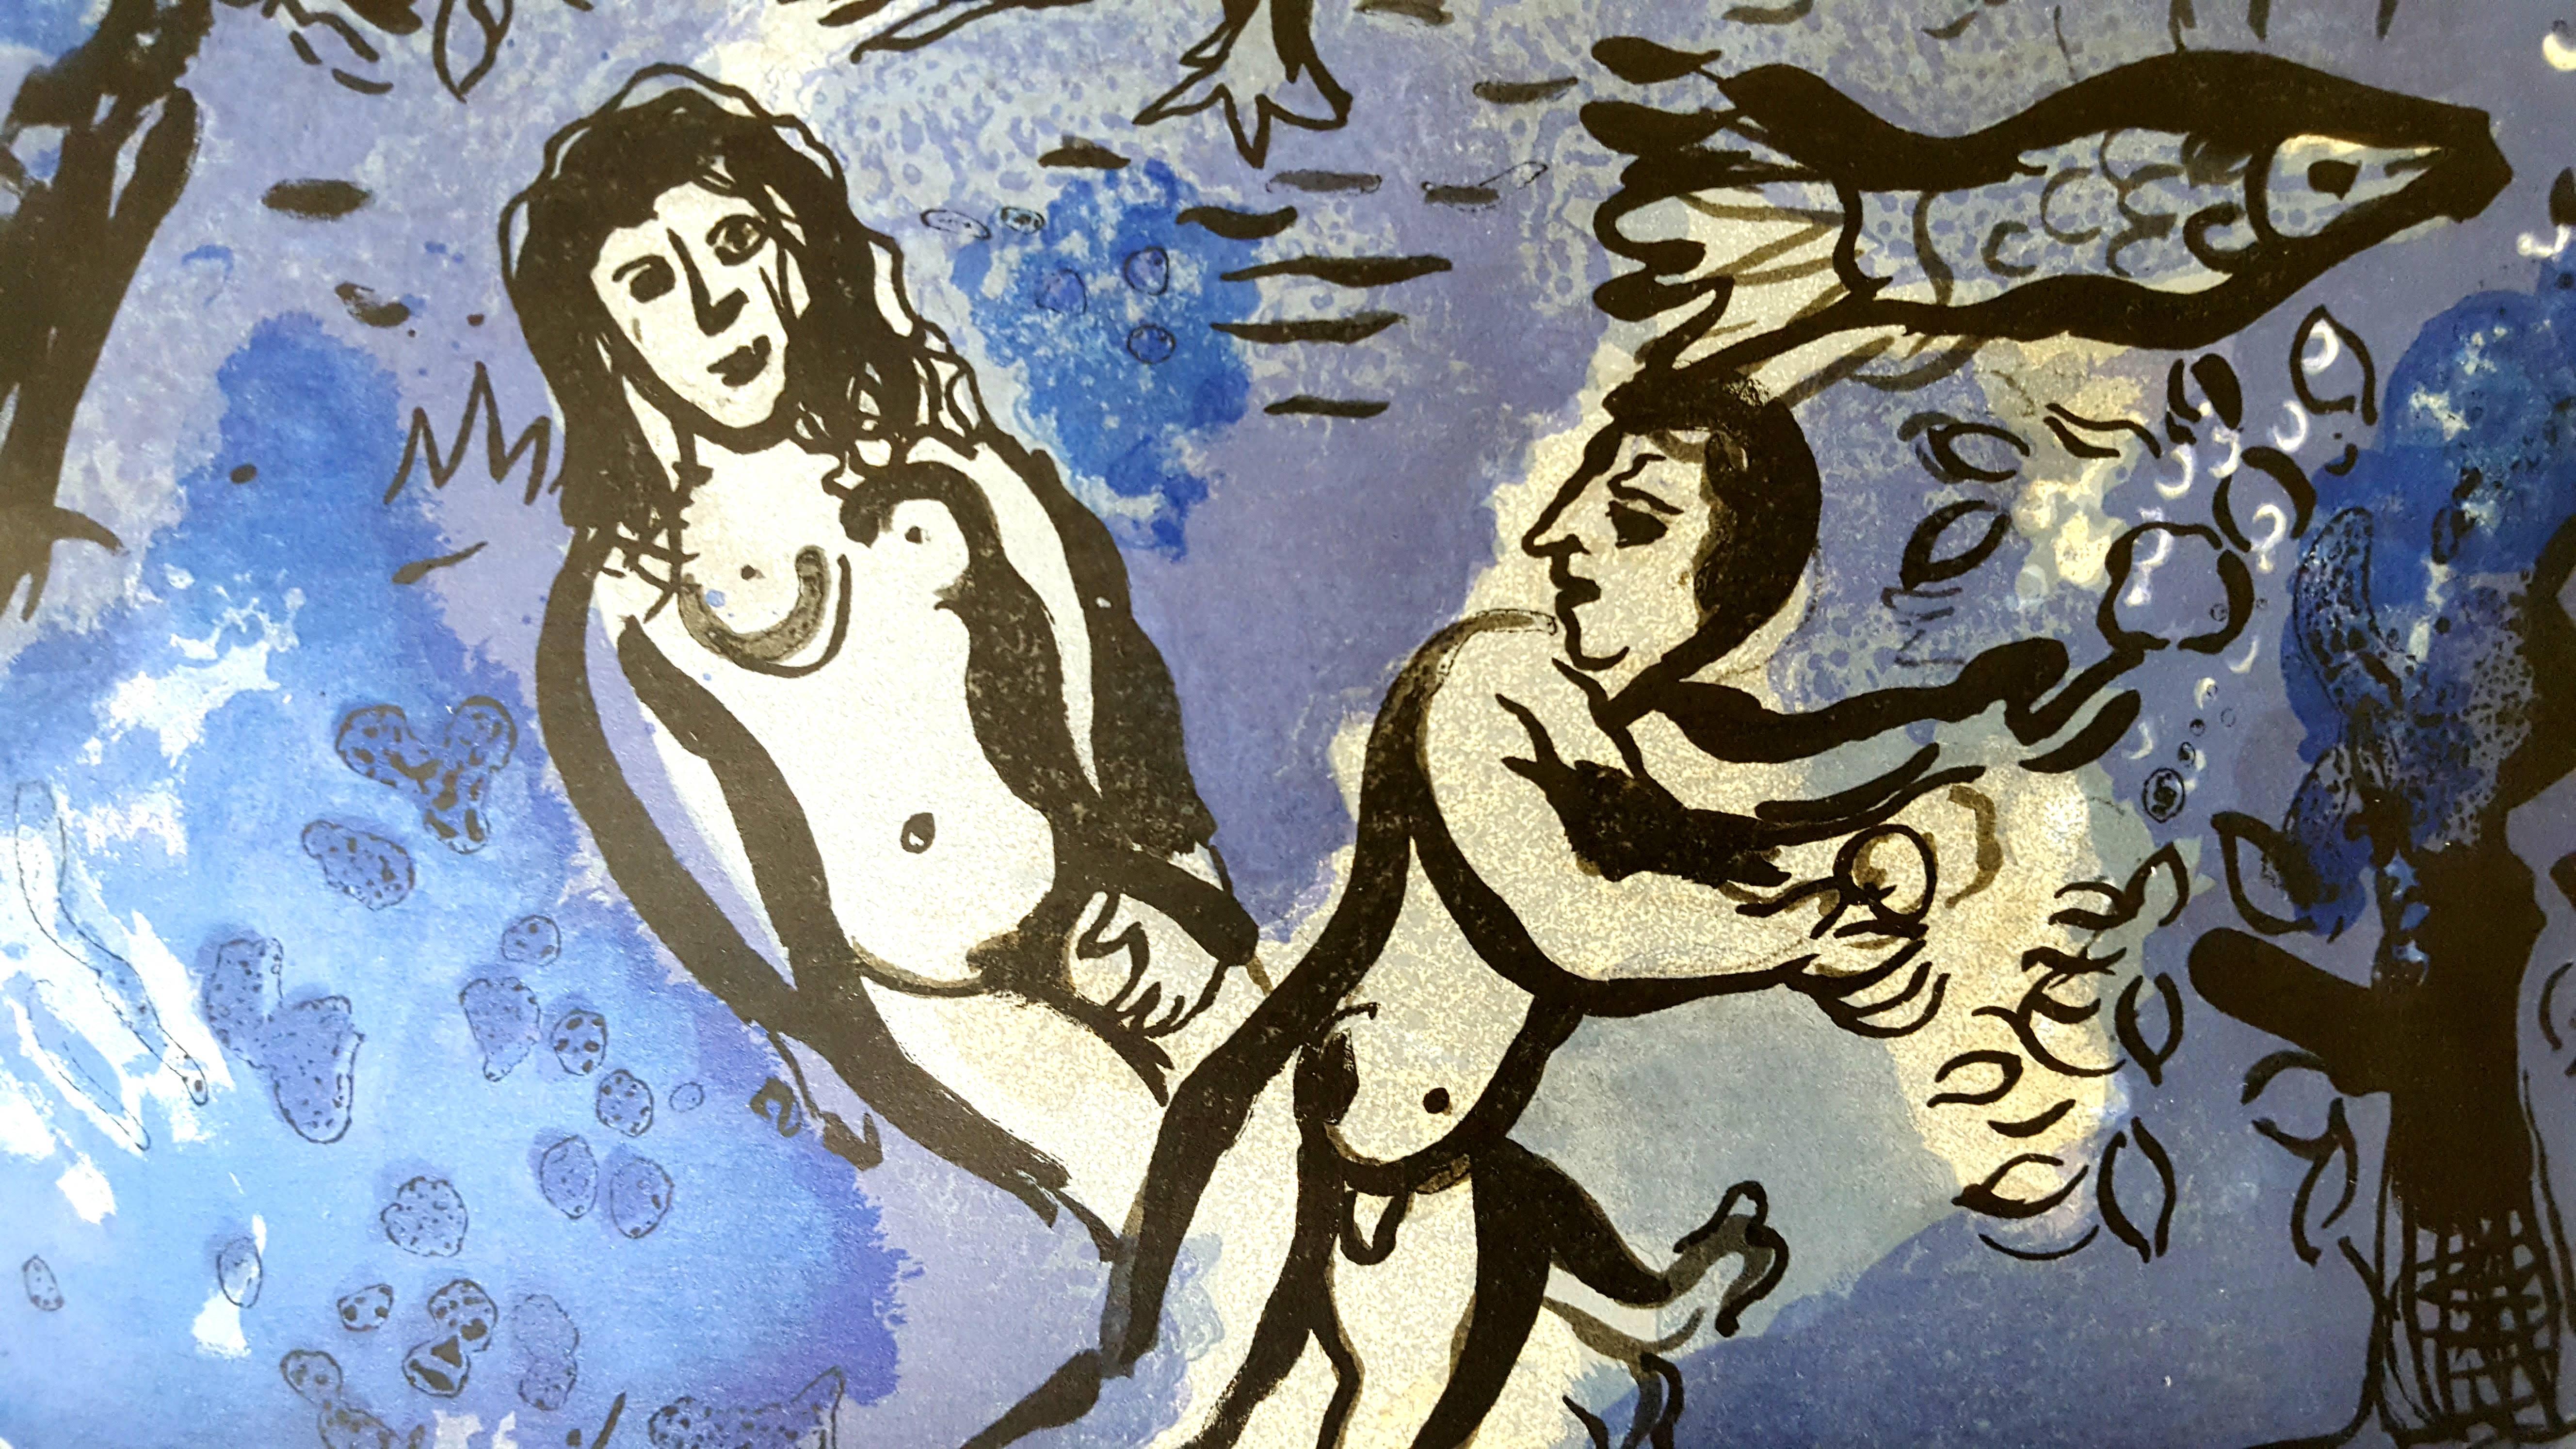 Marc Chagall - The Bible - Adam and Eve - Original Lithograph 1